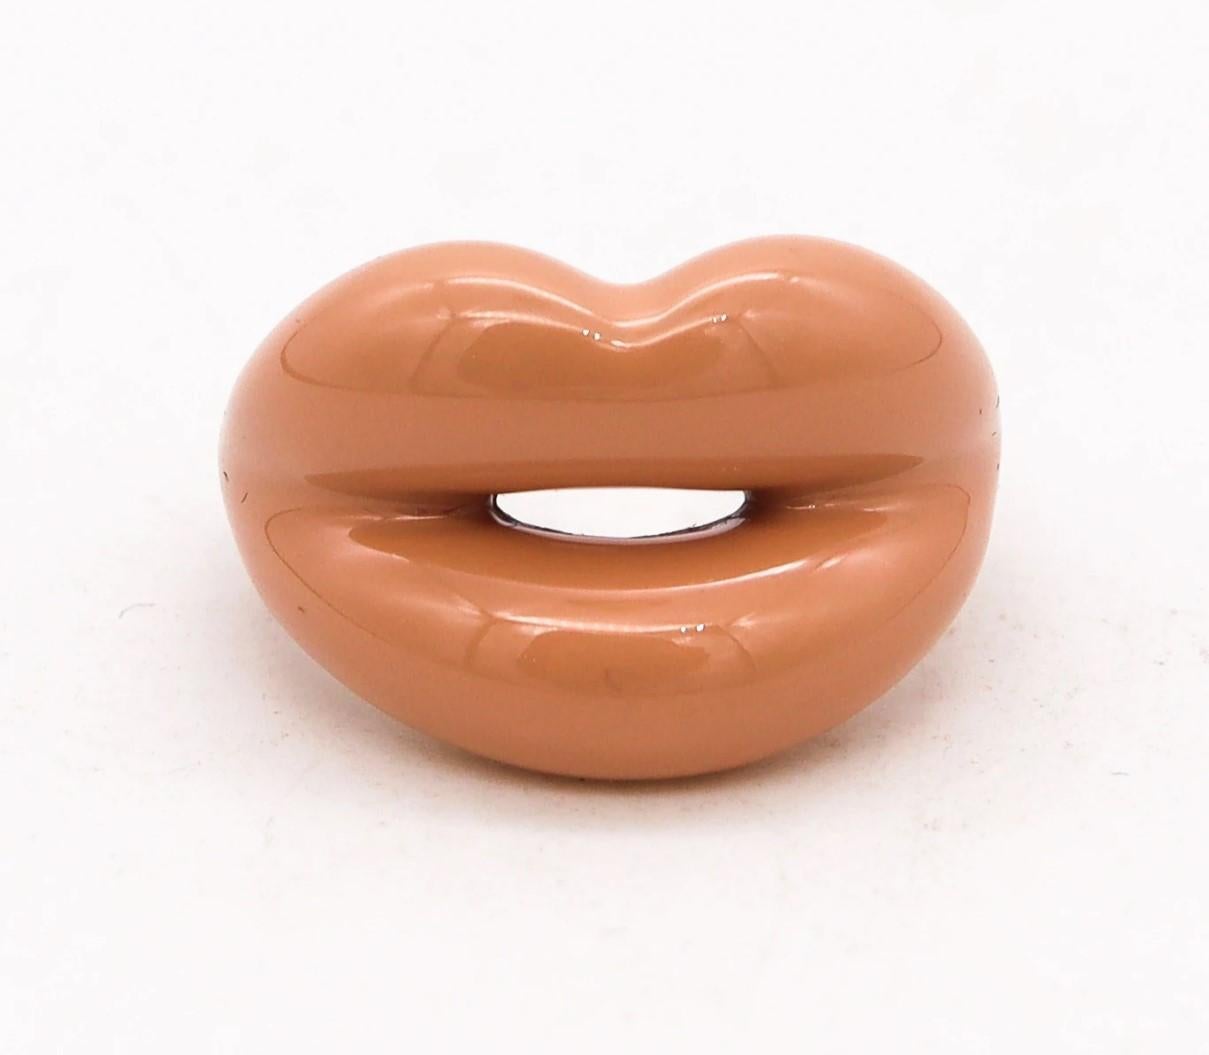 Hot-lips ring designed by Solange Azagury-Partridge.

The hot-lips rings by Solange Azagury-Partridge, were created into limited edition. This youthful and funny ring is crafted in solid .925 sterling silver and embellished, with peach hot